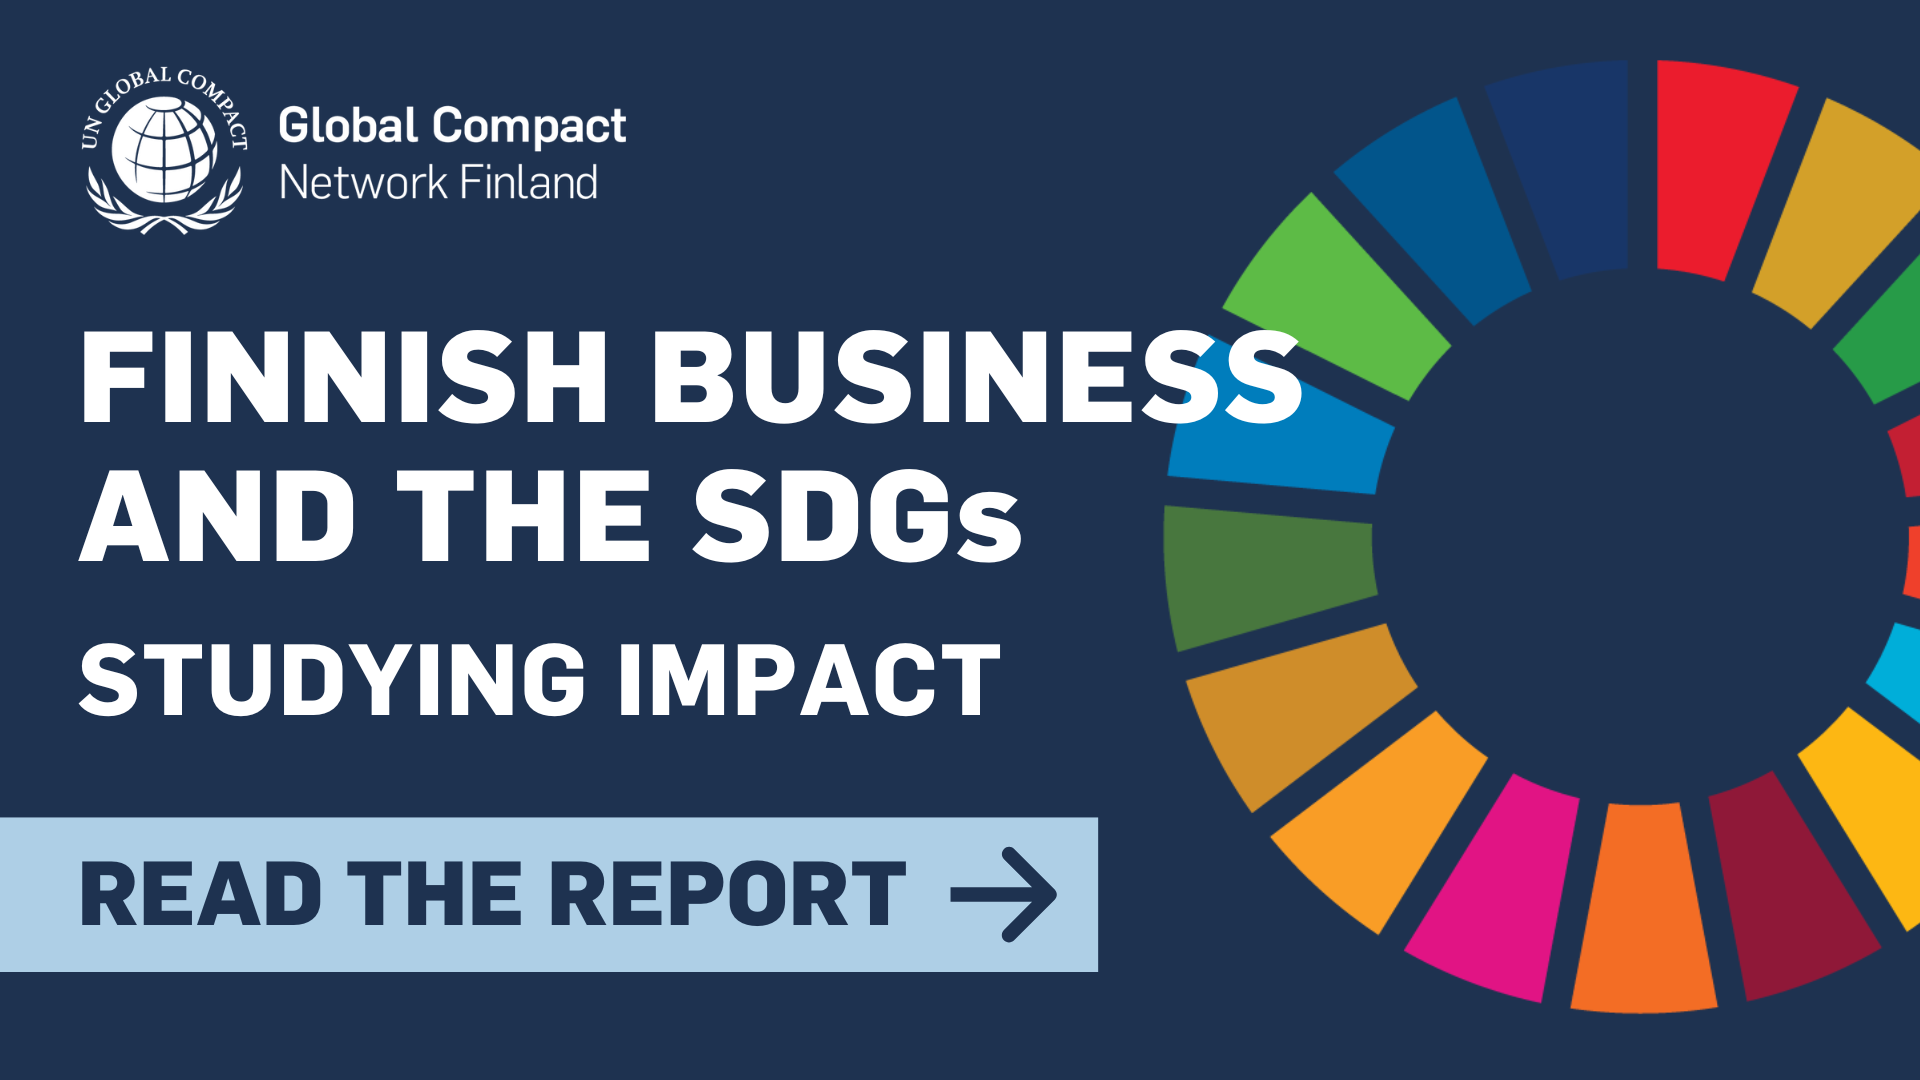 Finnish companies produce societal good, such as jobs and infrastructure, but still at the expense of nature and climate. The findings are made in a report published recently by UN Global Compact Finland.